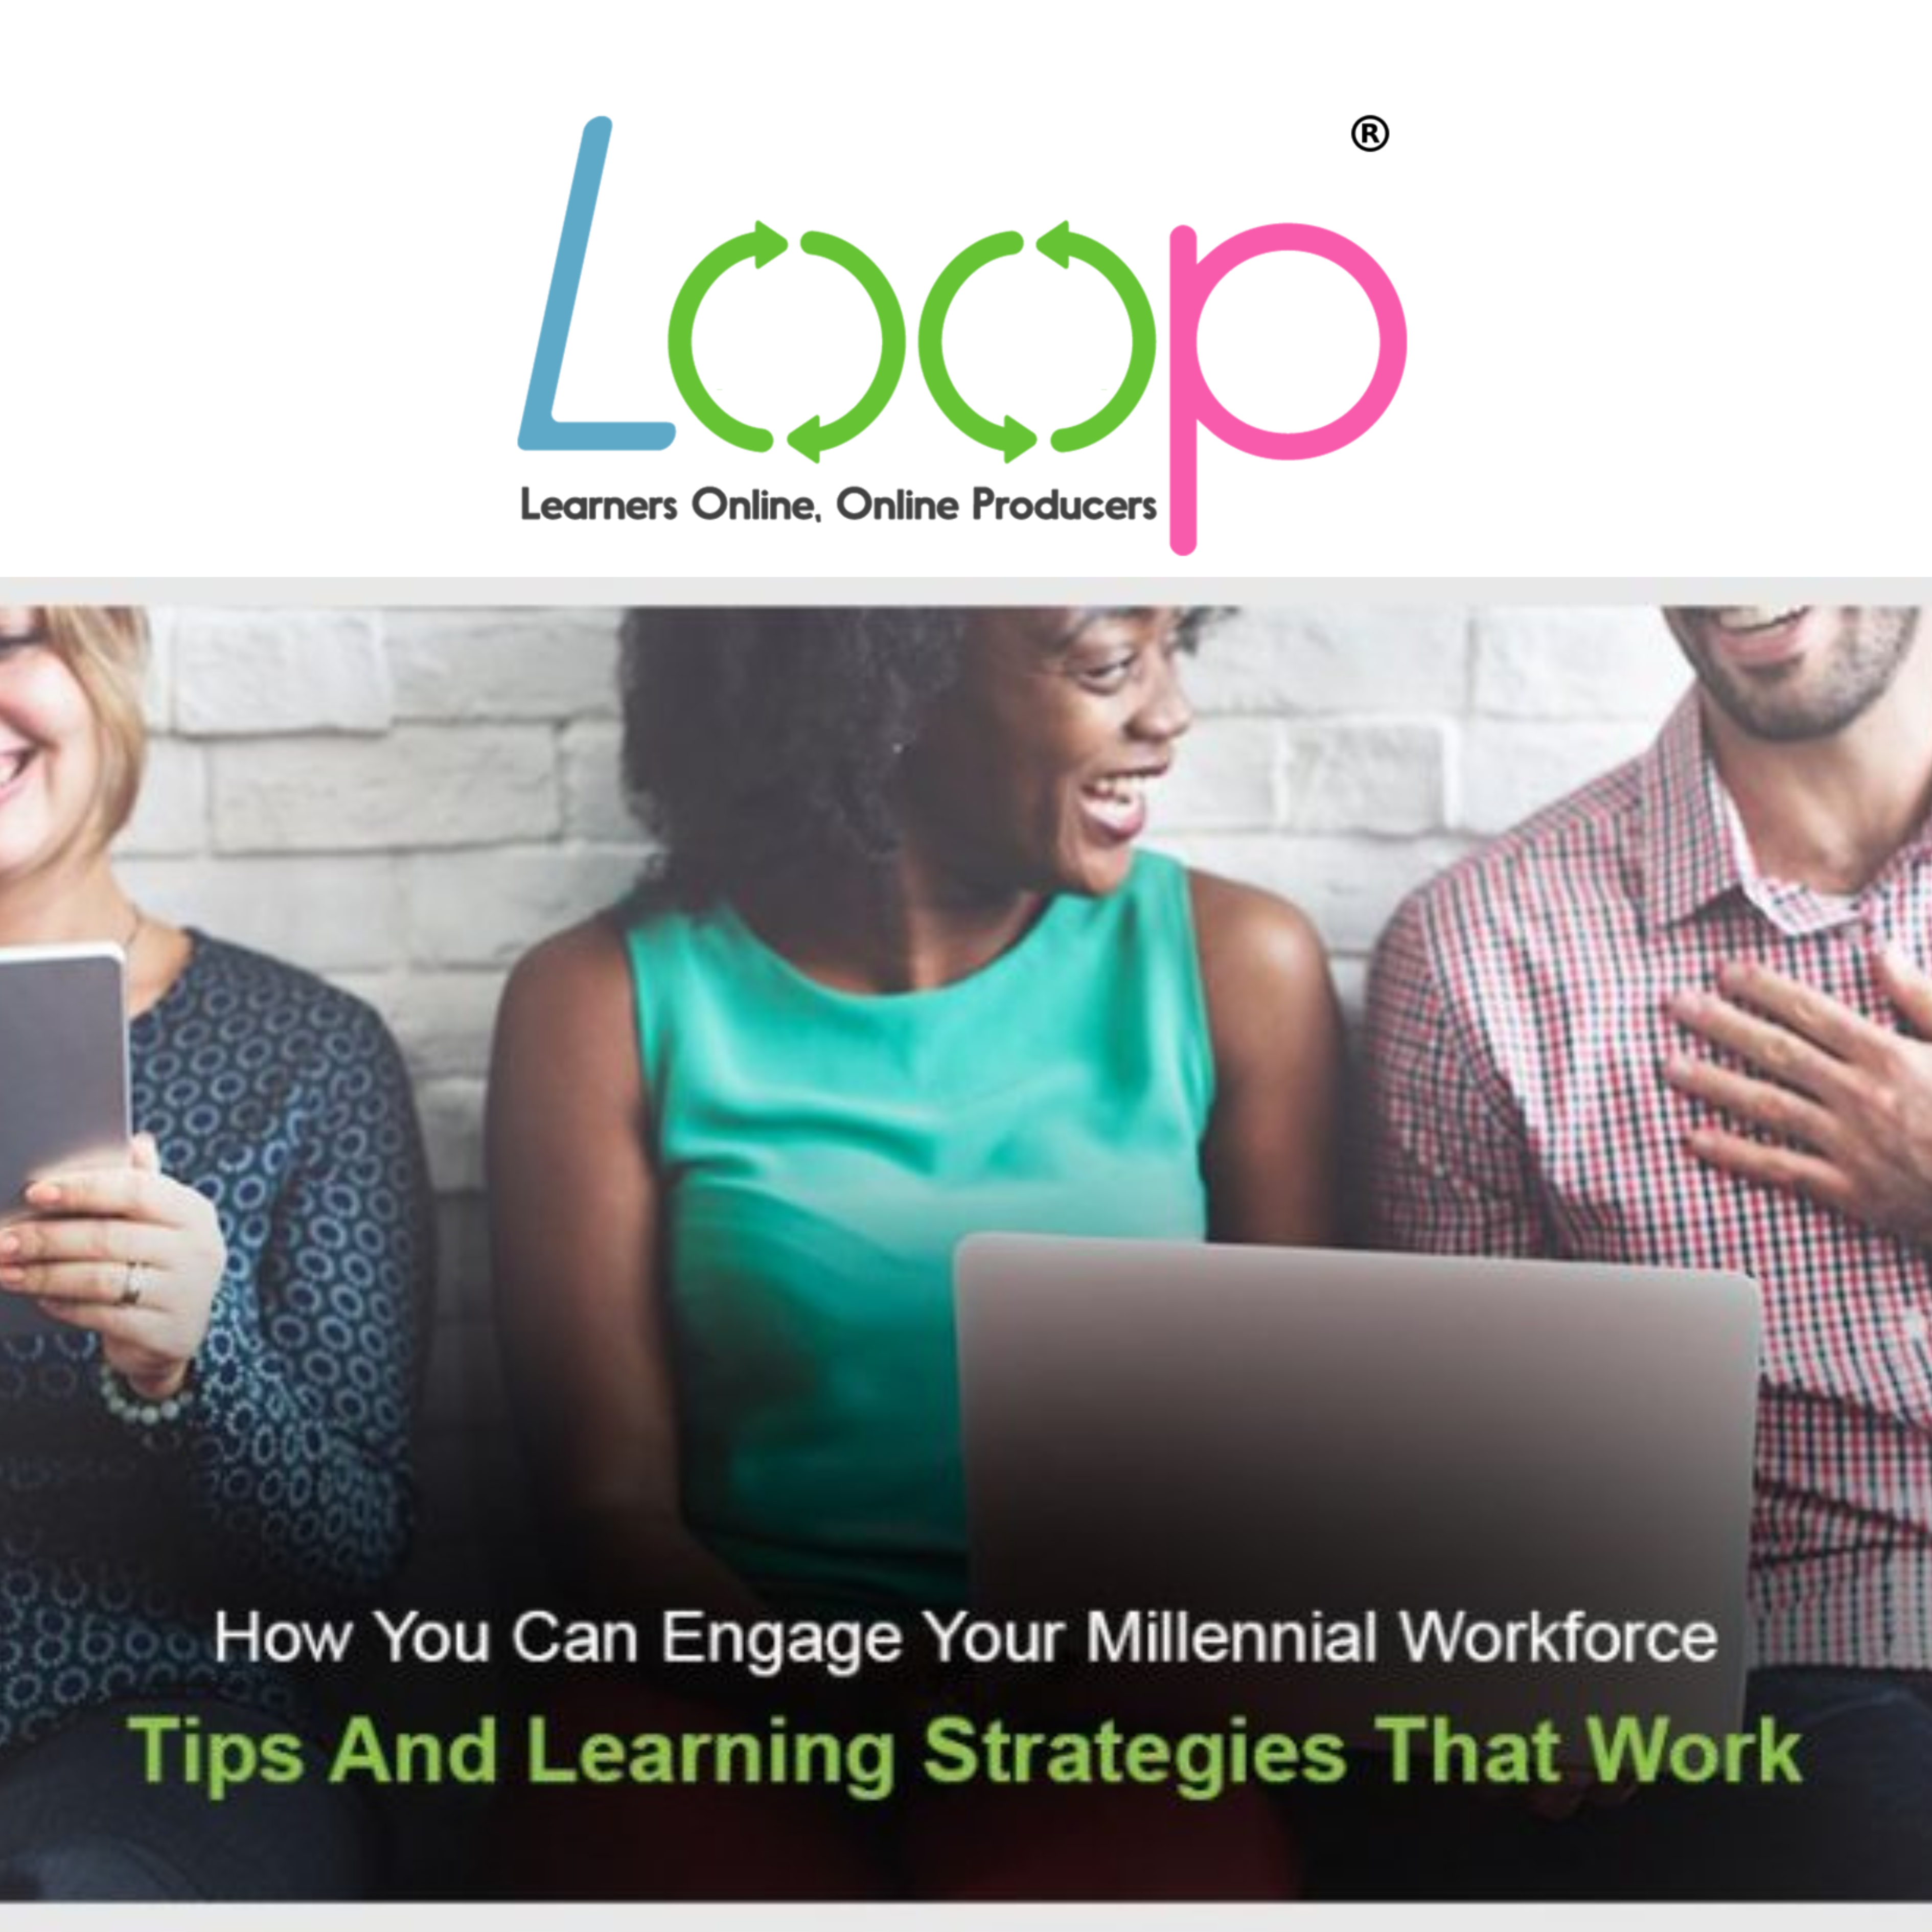 8 Learning Strategies And Tips To Engage Your Millennial Workforce